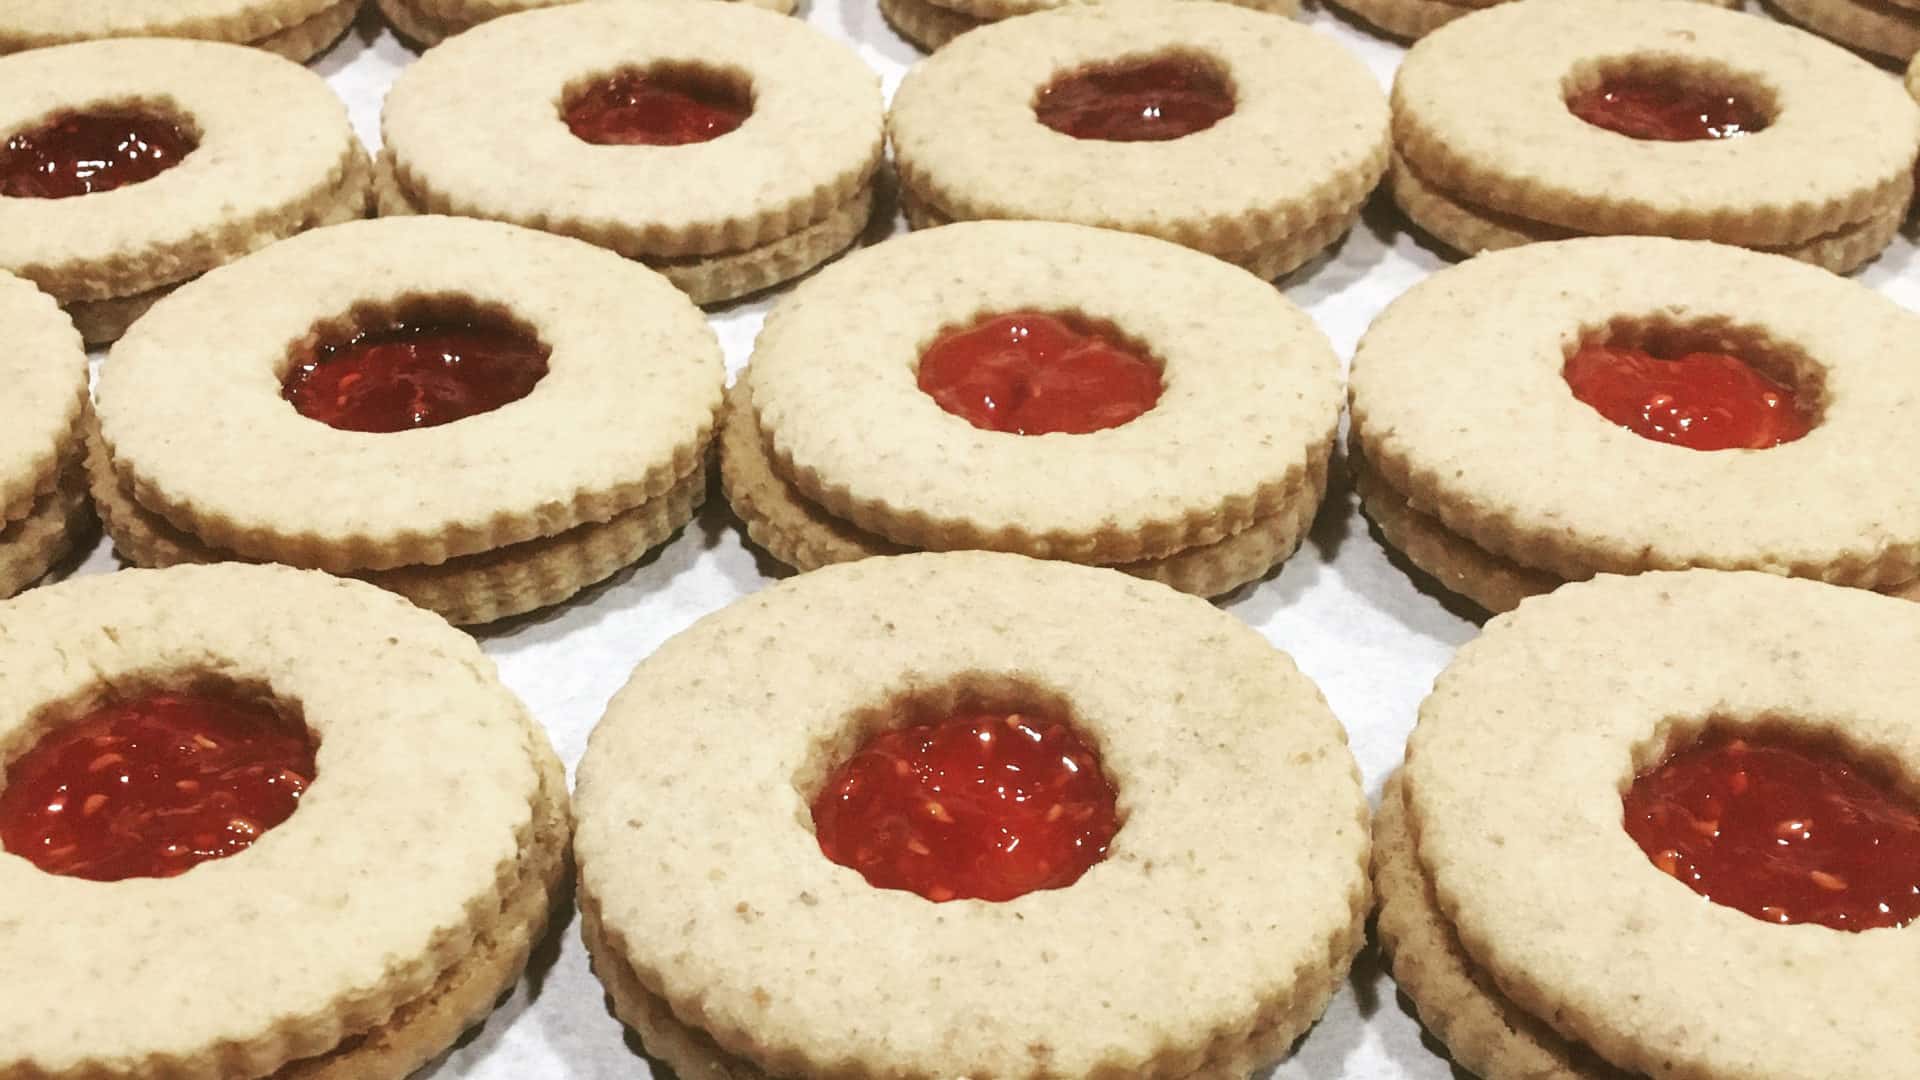 Jam sandwich cookies from Sweet Sam Bakes wait in bright rows. Press photo courtesy of the artist